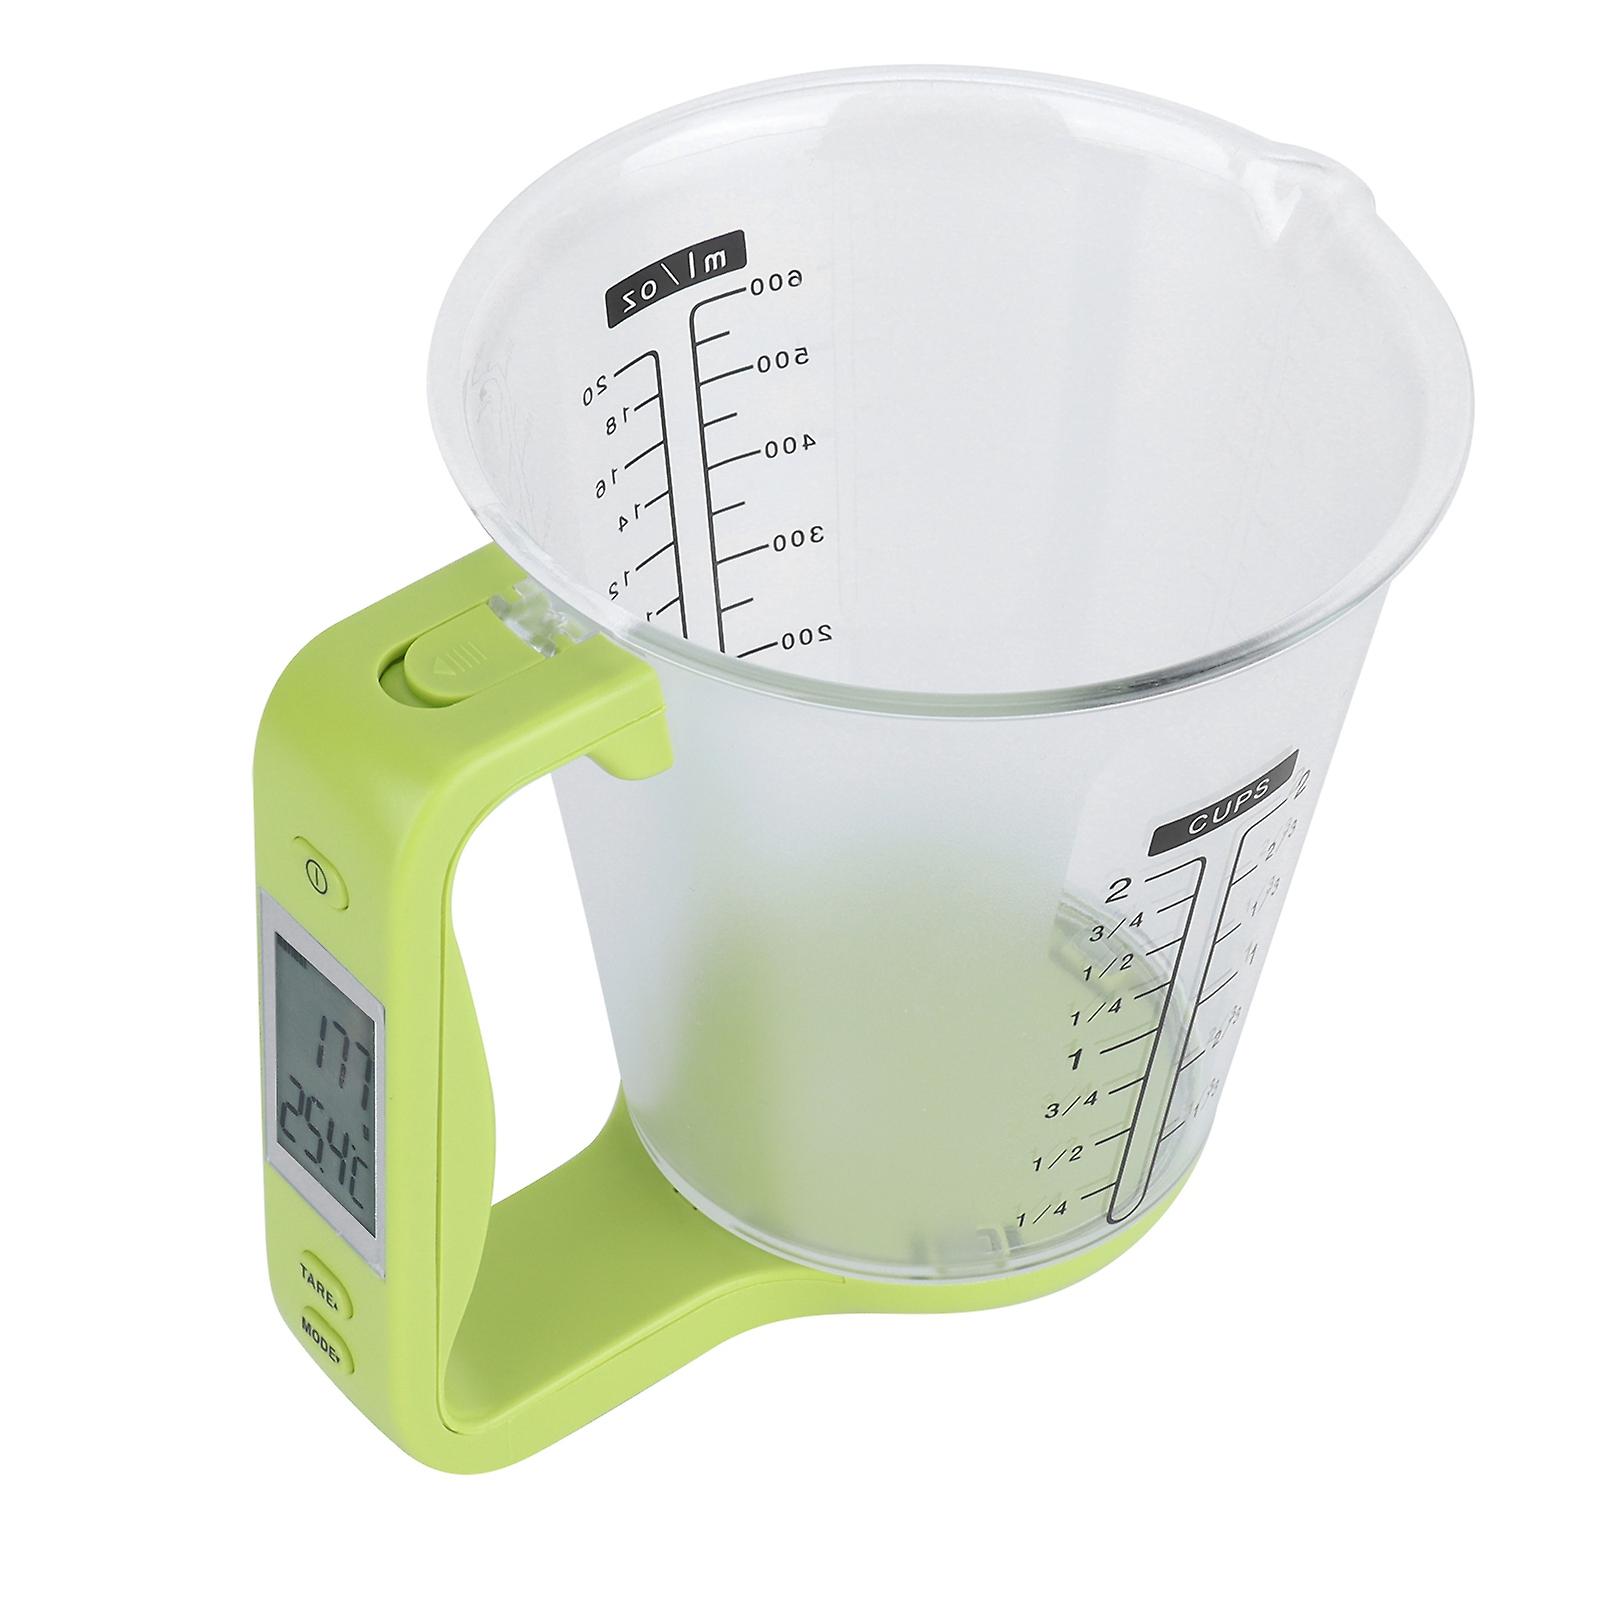 Tyc01 Electronic Measuring Cup 1000g 0.1g Accuracy Detachable Automatic Measuring Cup Scale For Kitchen